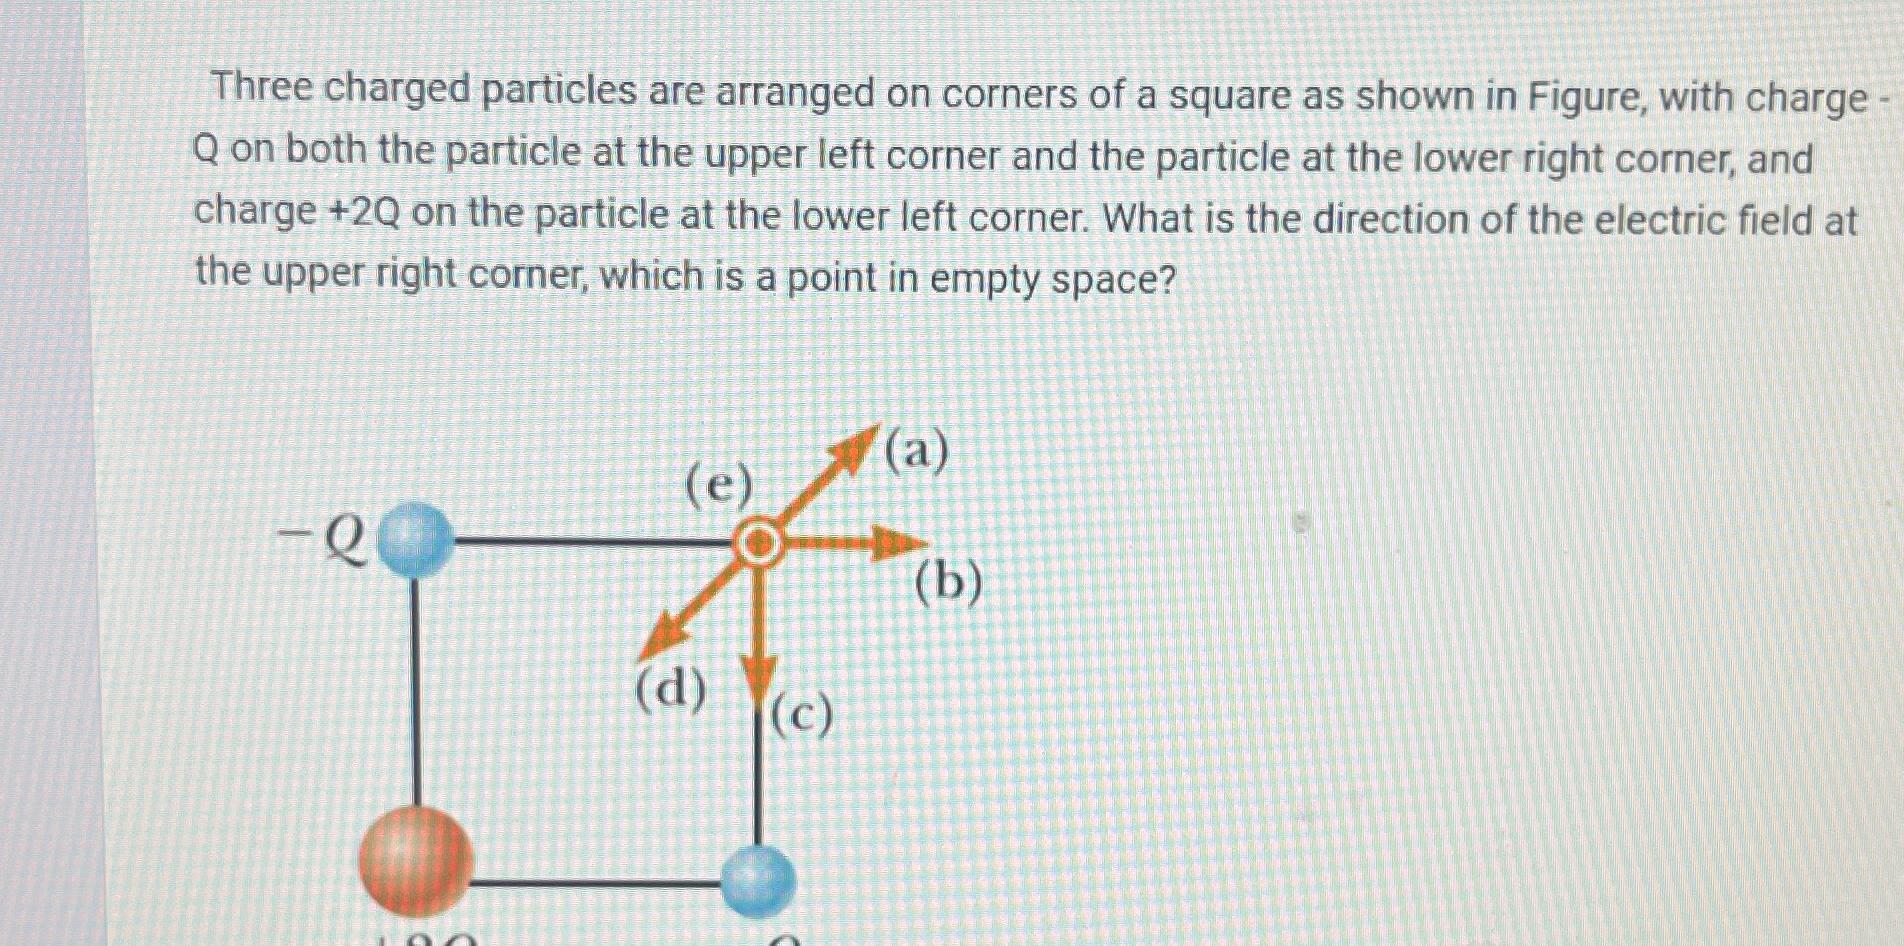 Three charged particles are arranged on corners of a square as shown in Figure, with charge Q on both the